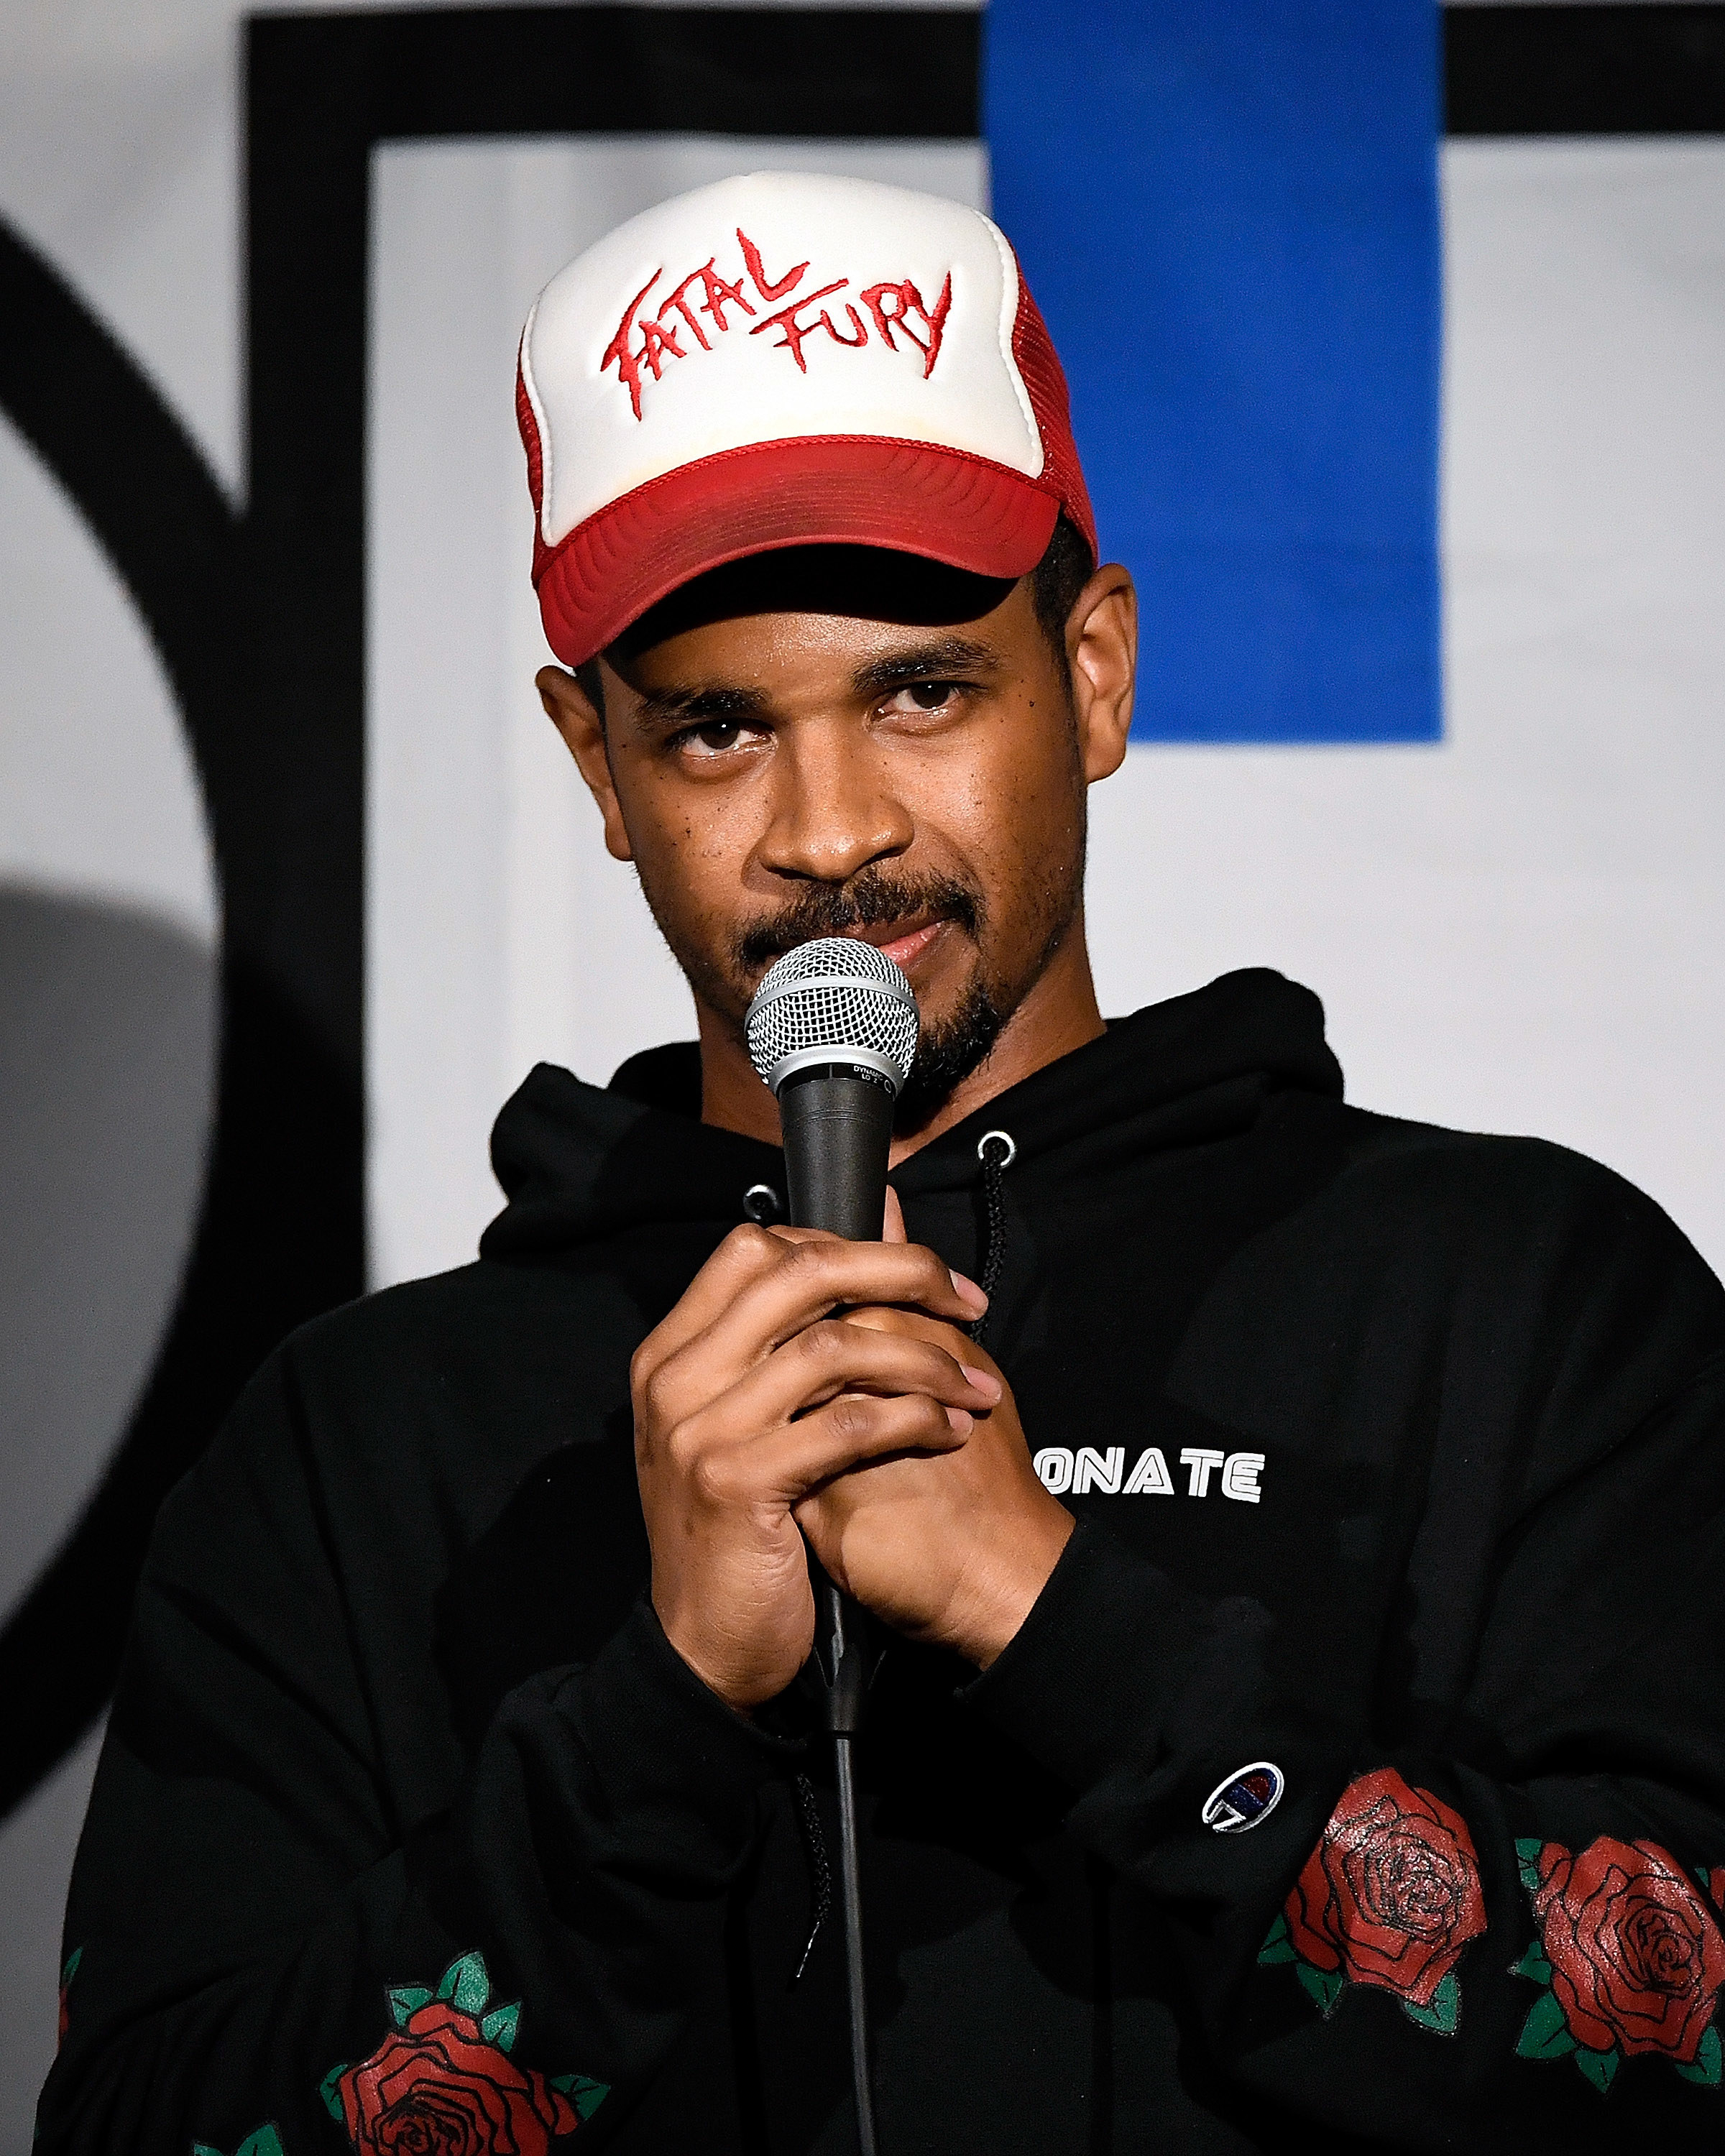 Comedian Damon Wayans Jr. performs during his appearance at the NoHo Comedy Festival at Ha Ha Cafe Comedy Club on May 4, 2019 in North Hollywood, California.